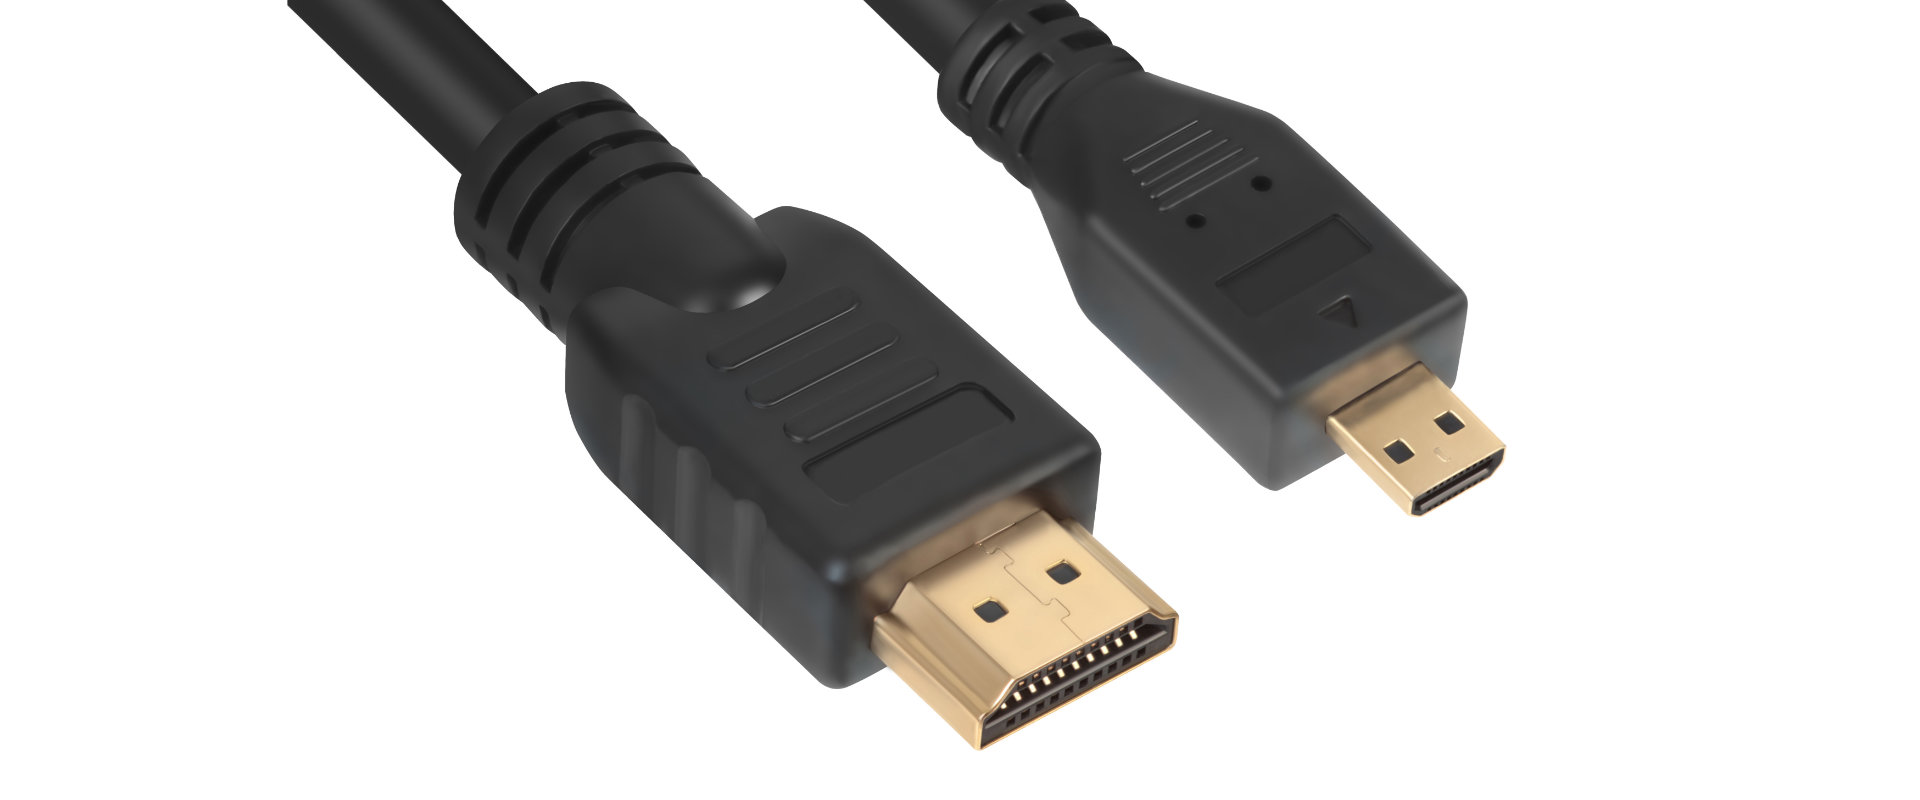 Micro HDMI to HDMI Adapter Cable, Wenter Micro HDMI to HDMI Cable